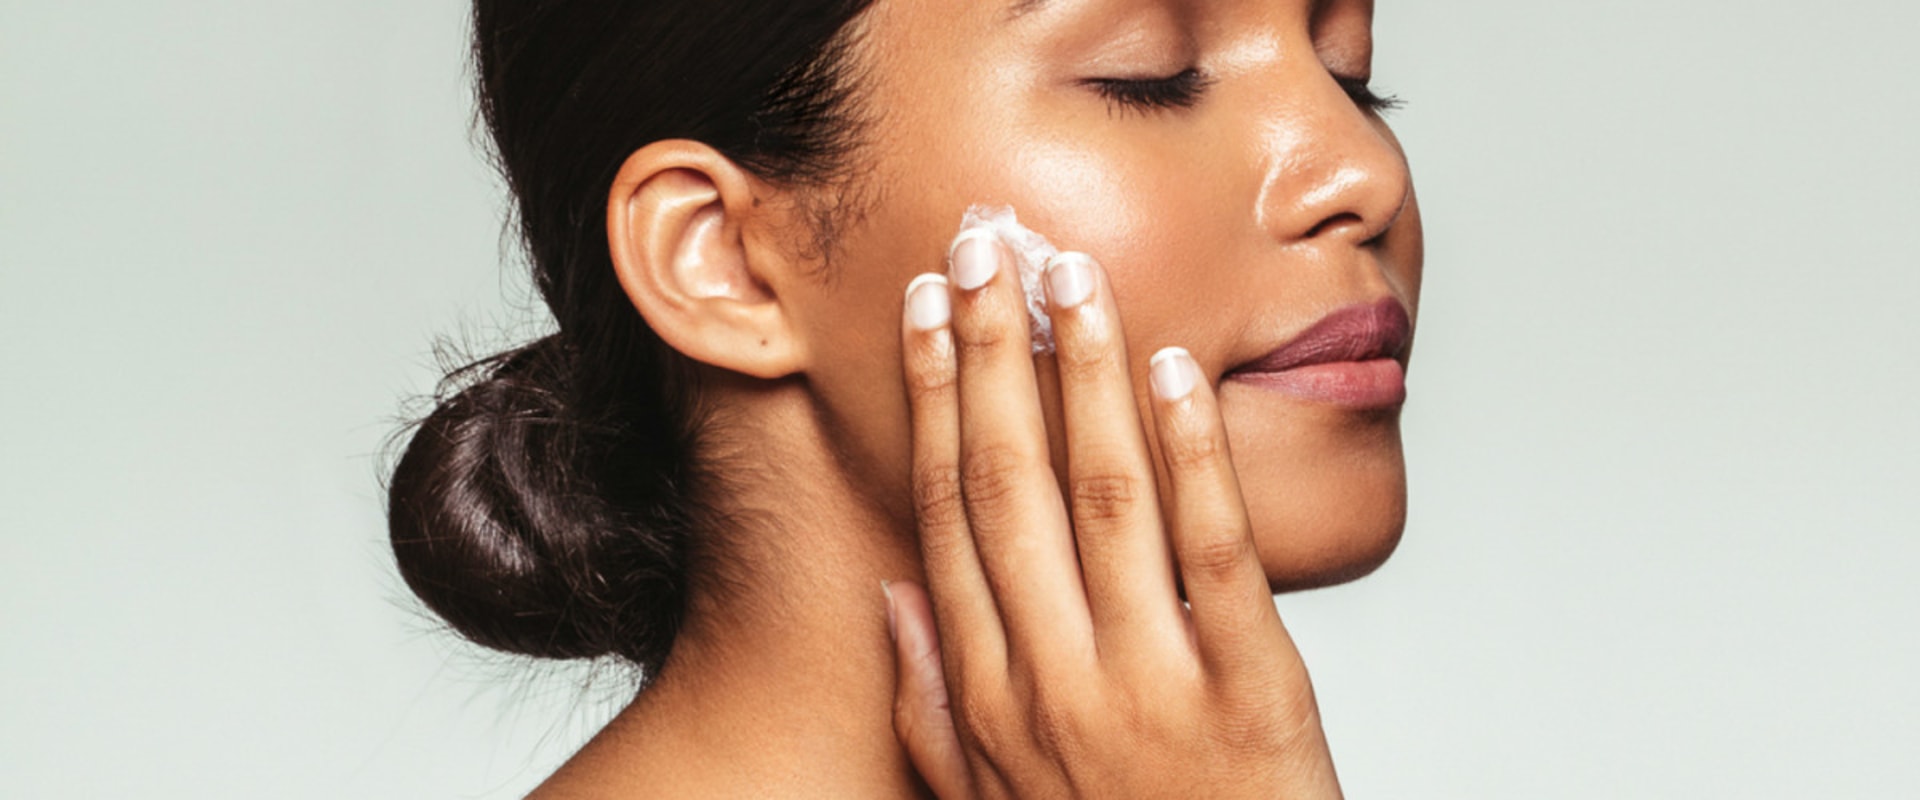 Moisturizing and Hydrating for Healthy Skin